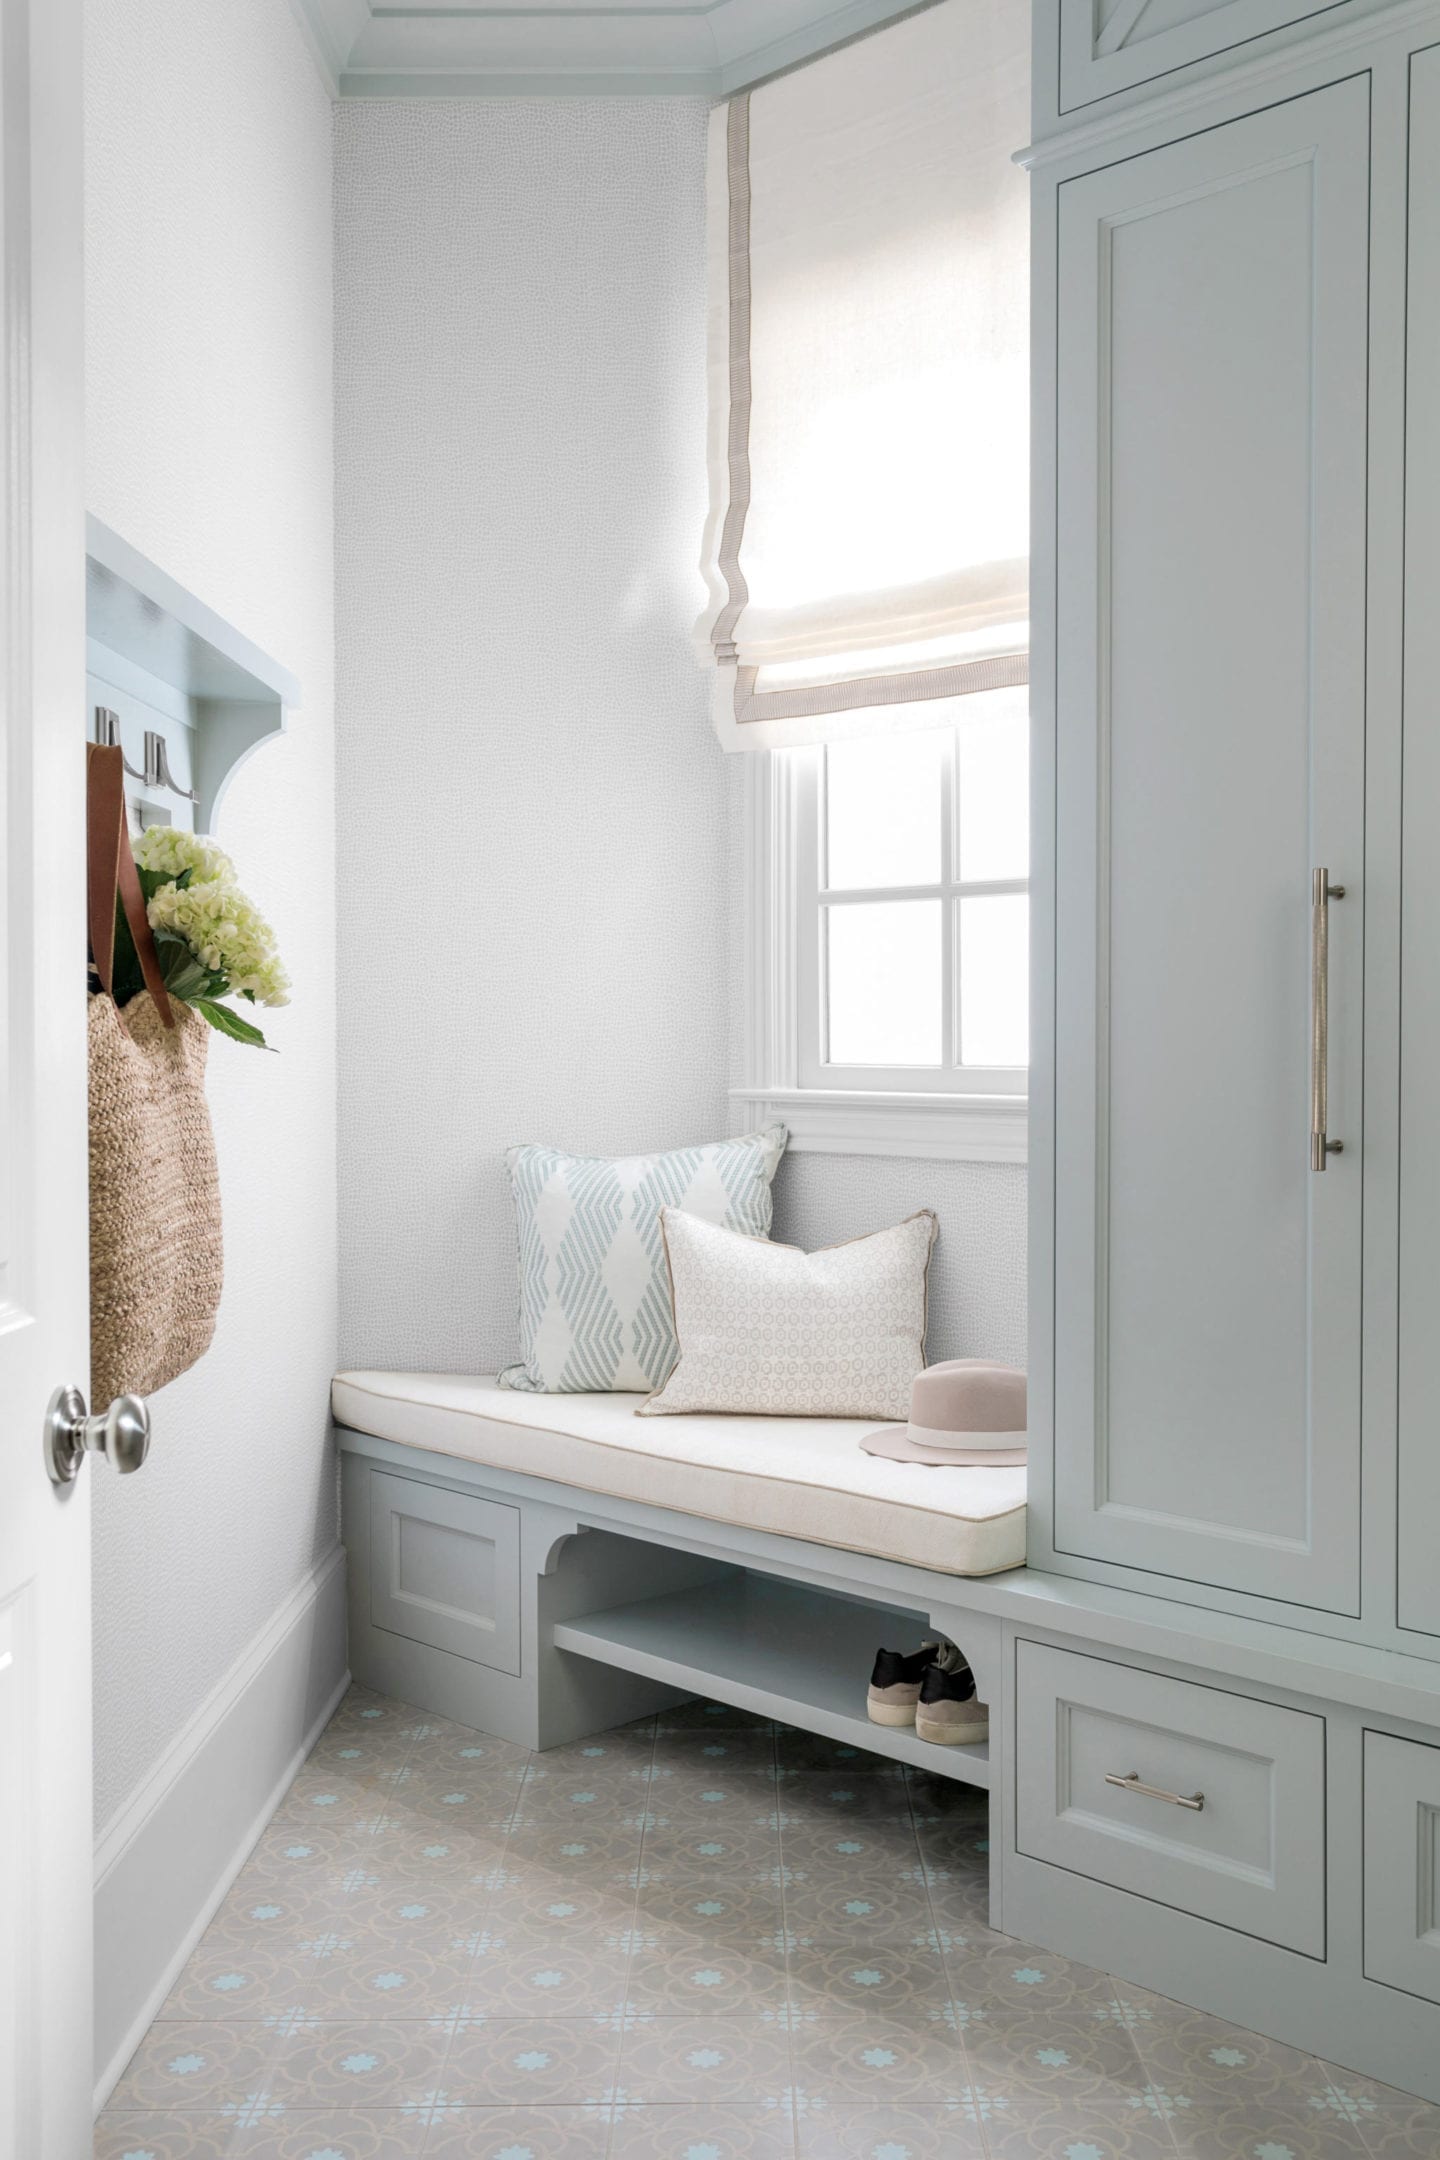 6 Helpful Storage Ideas for Your Mudroom - This Old House